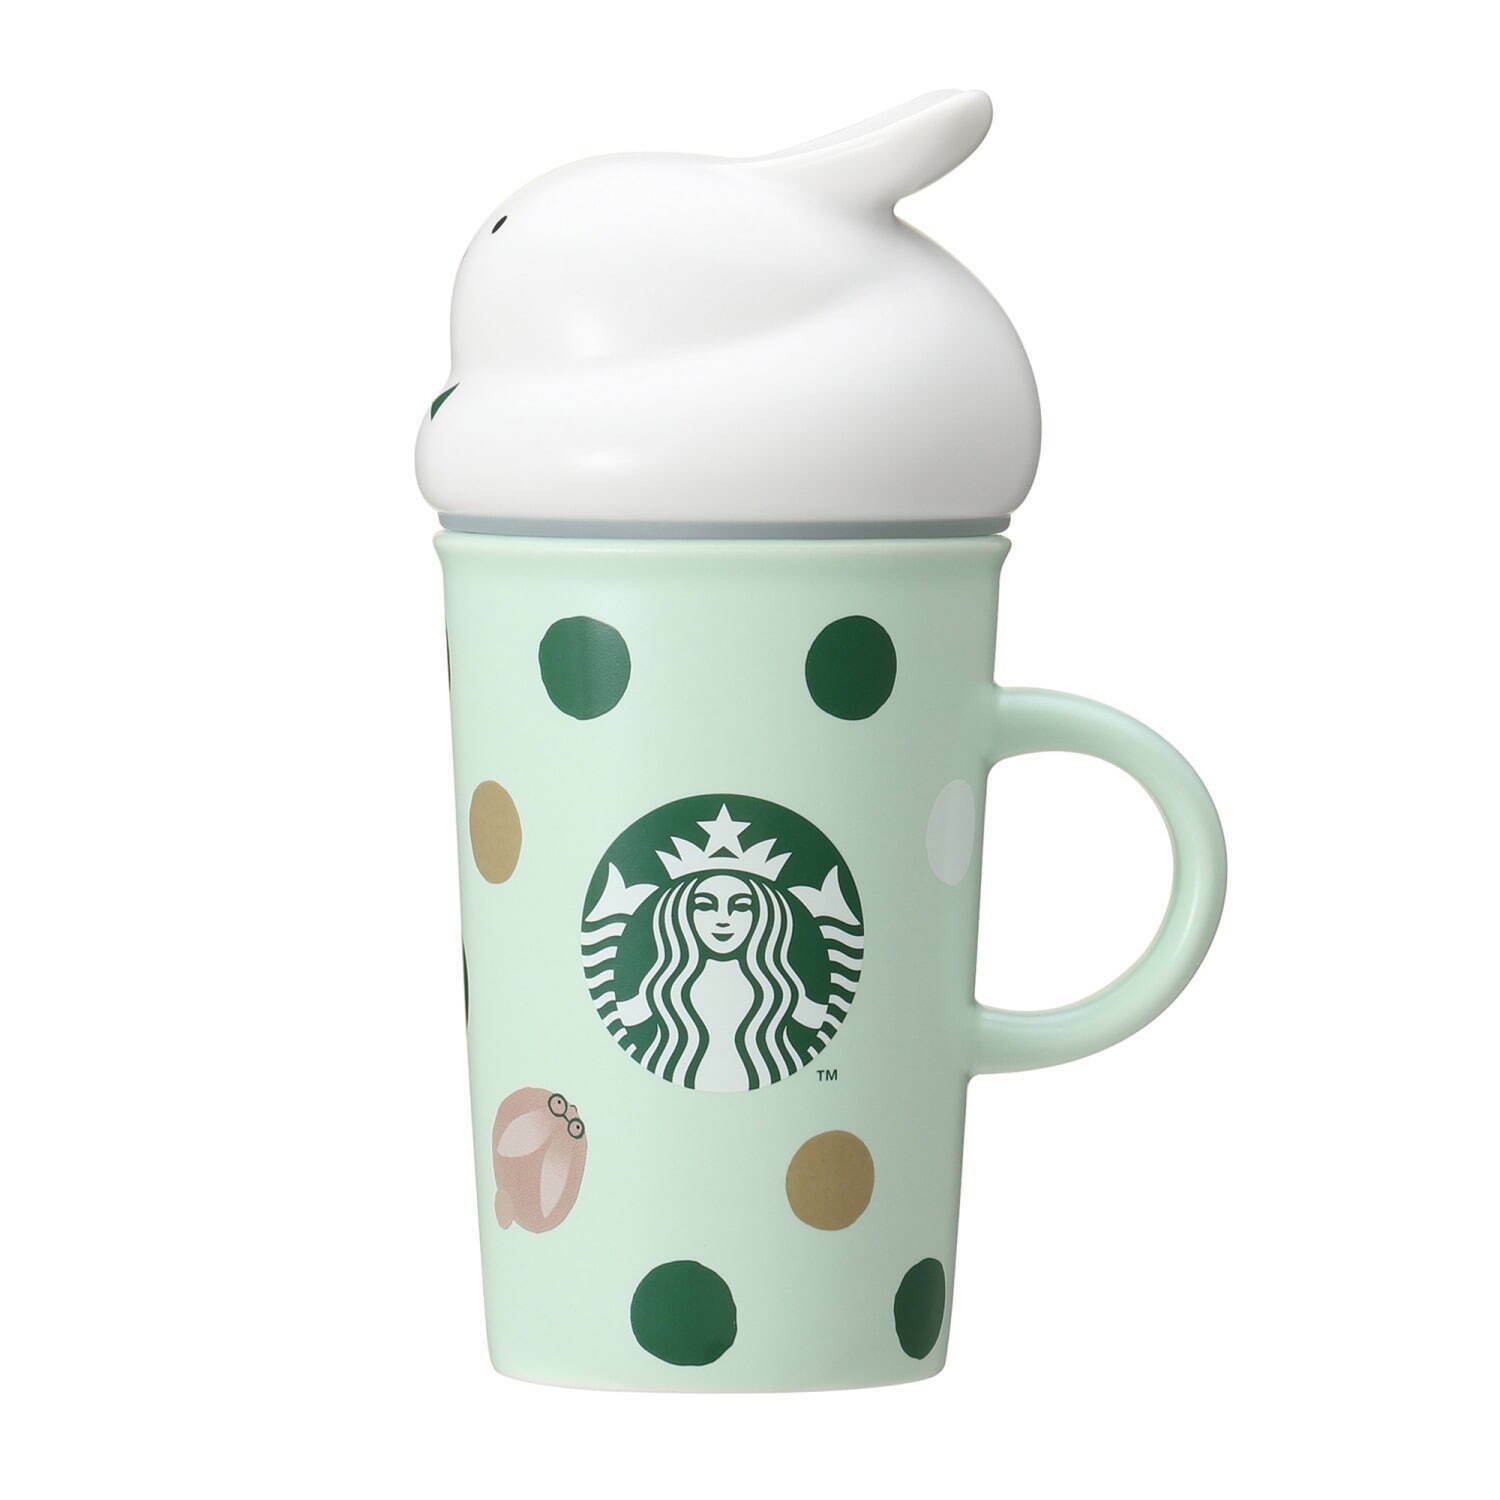 Got lucky and found the new Starbucks cup everyone is talking about an